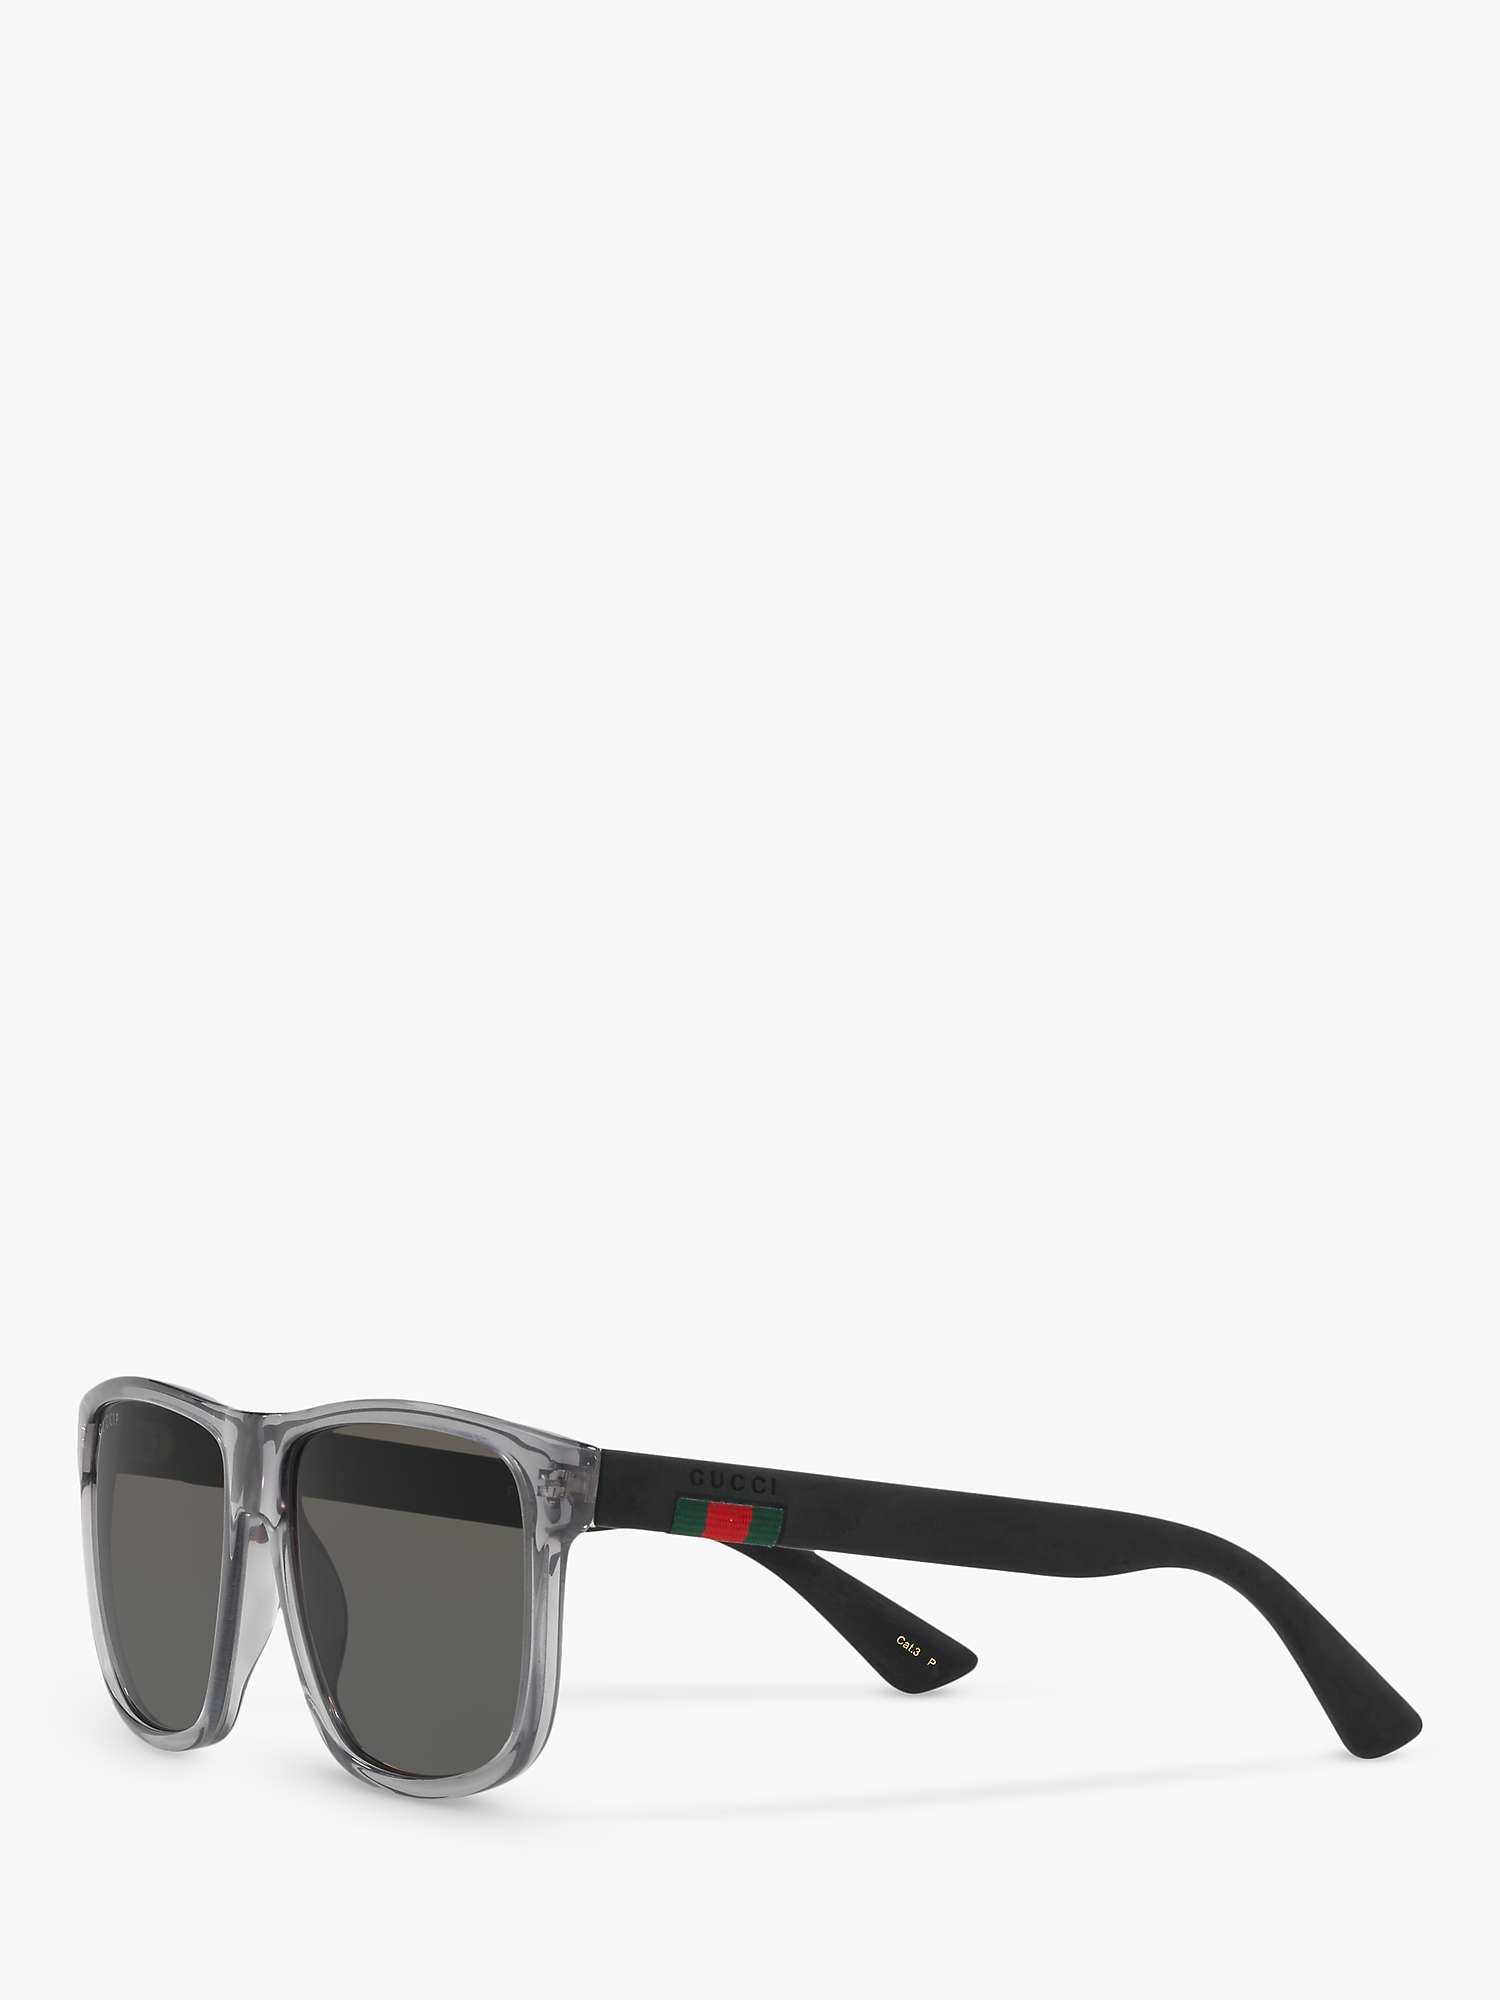 Gucci GG0010S Polarised D-Frame Sunglasses, Charcoal/Grey at John Lewis &  Partners